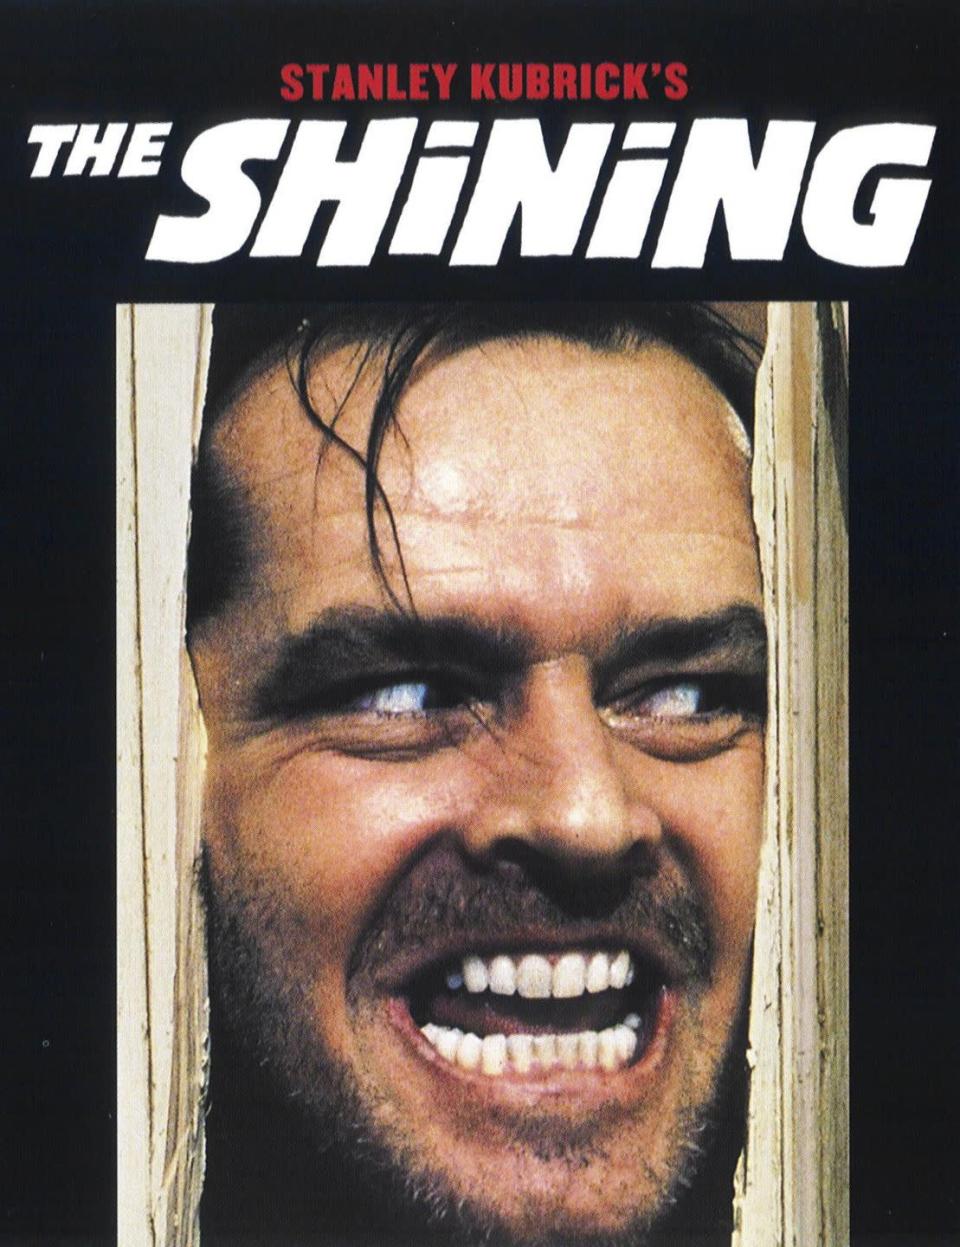 <p><em>The Shining</em>, one of Jack Nicholson<span class="redactor-invisible-space">'s most well-known films, was released this year. The film is still considered one of the scariest of all time, and <a href="http://www.goodhousekeeping.com/life/entertainment/a34867/the-shining-grady-twins-now/" rel="nofollow noopener" target="_blank" data-ylk="slk:the Grady twins" class="link ">the Grady twins</a> went on to inspire Halloween costumes for years to come. </span></p>